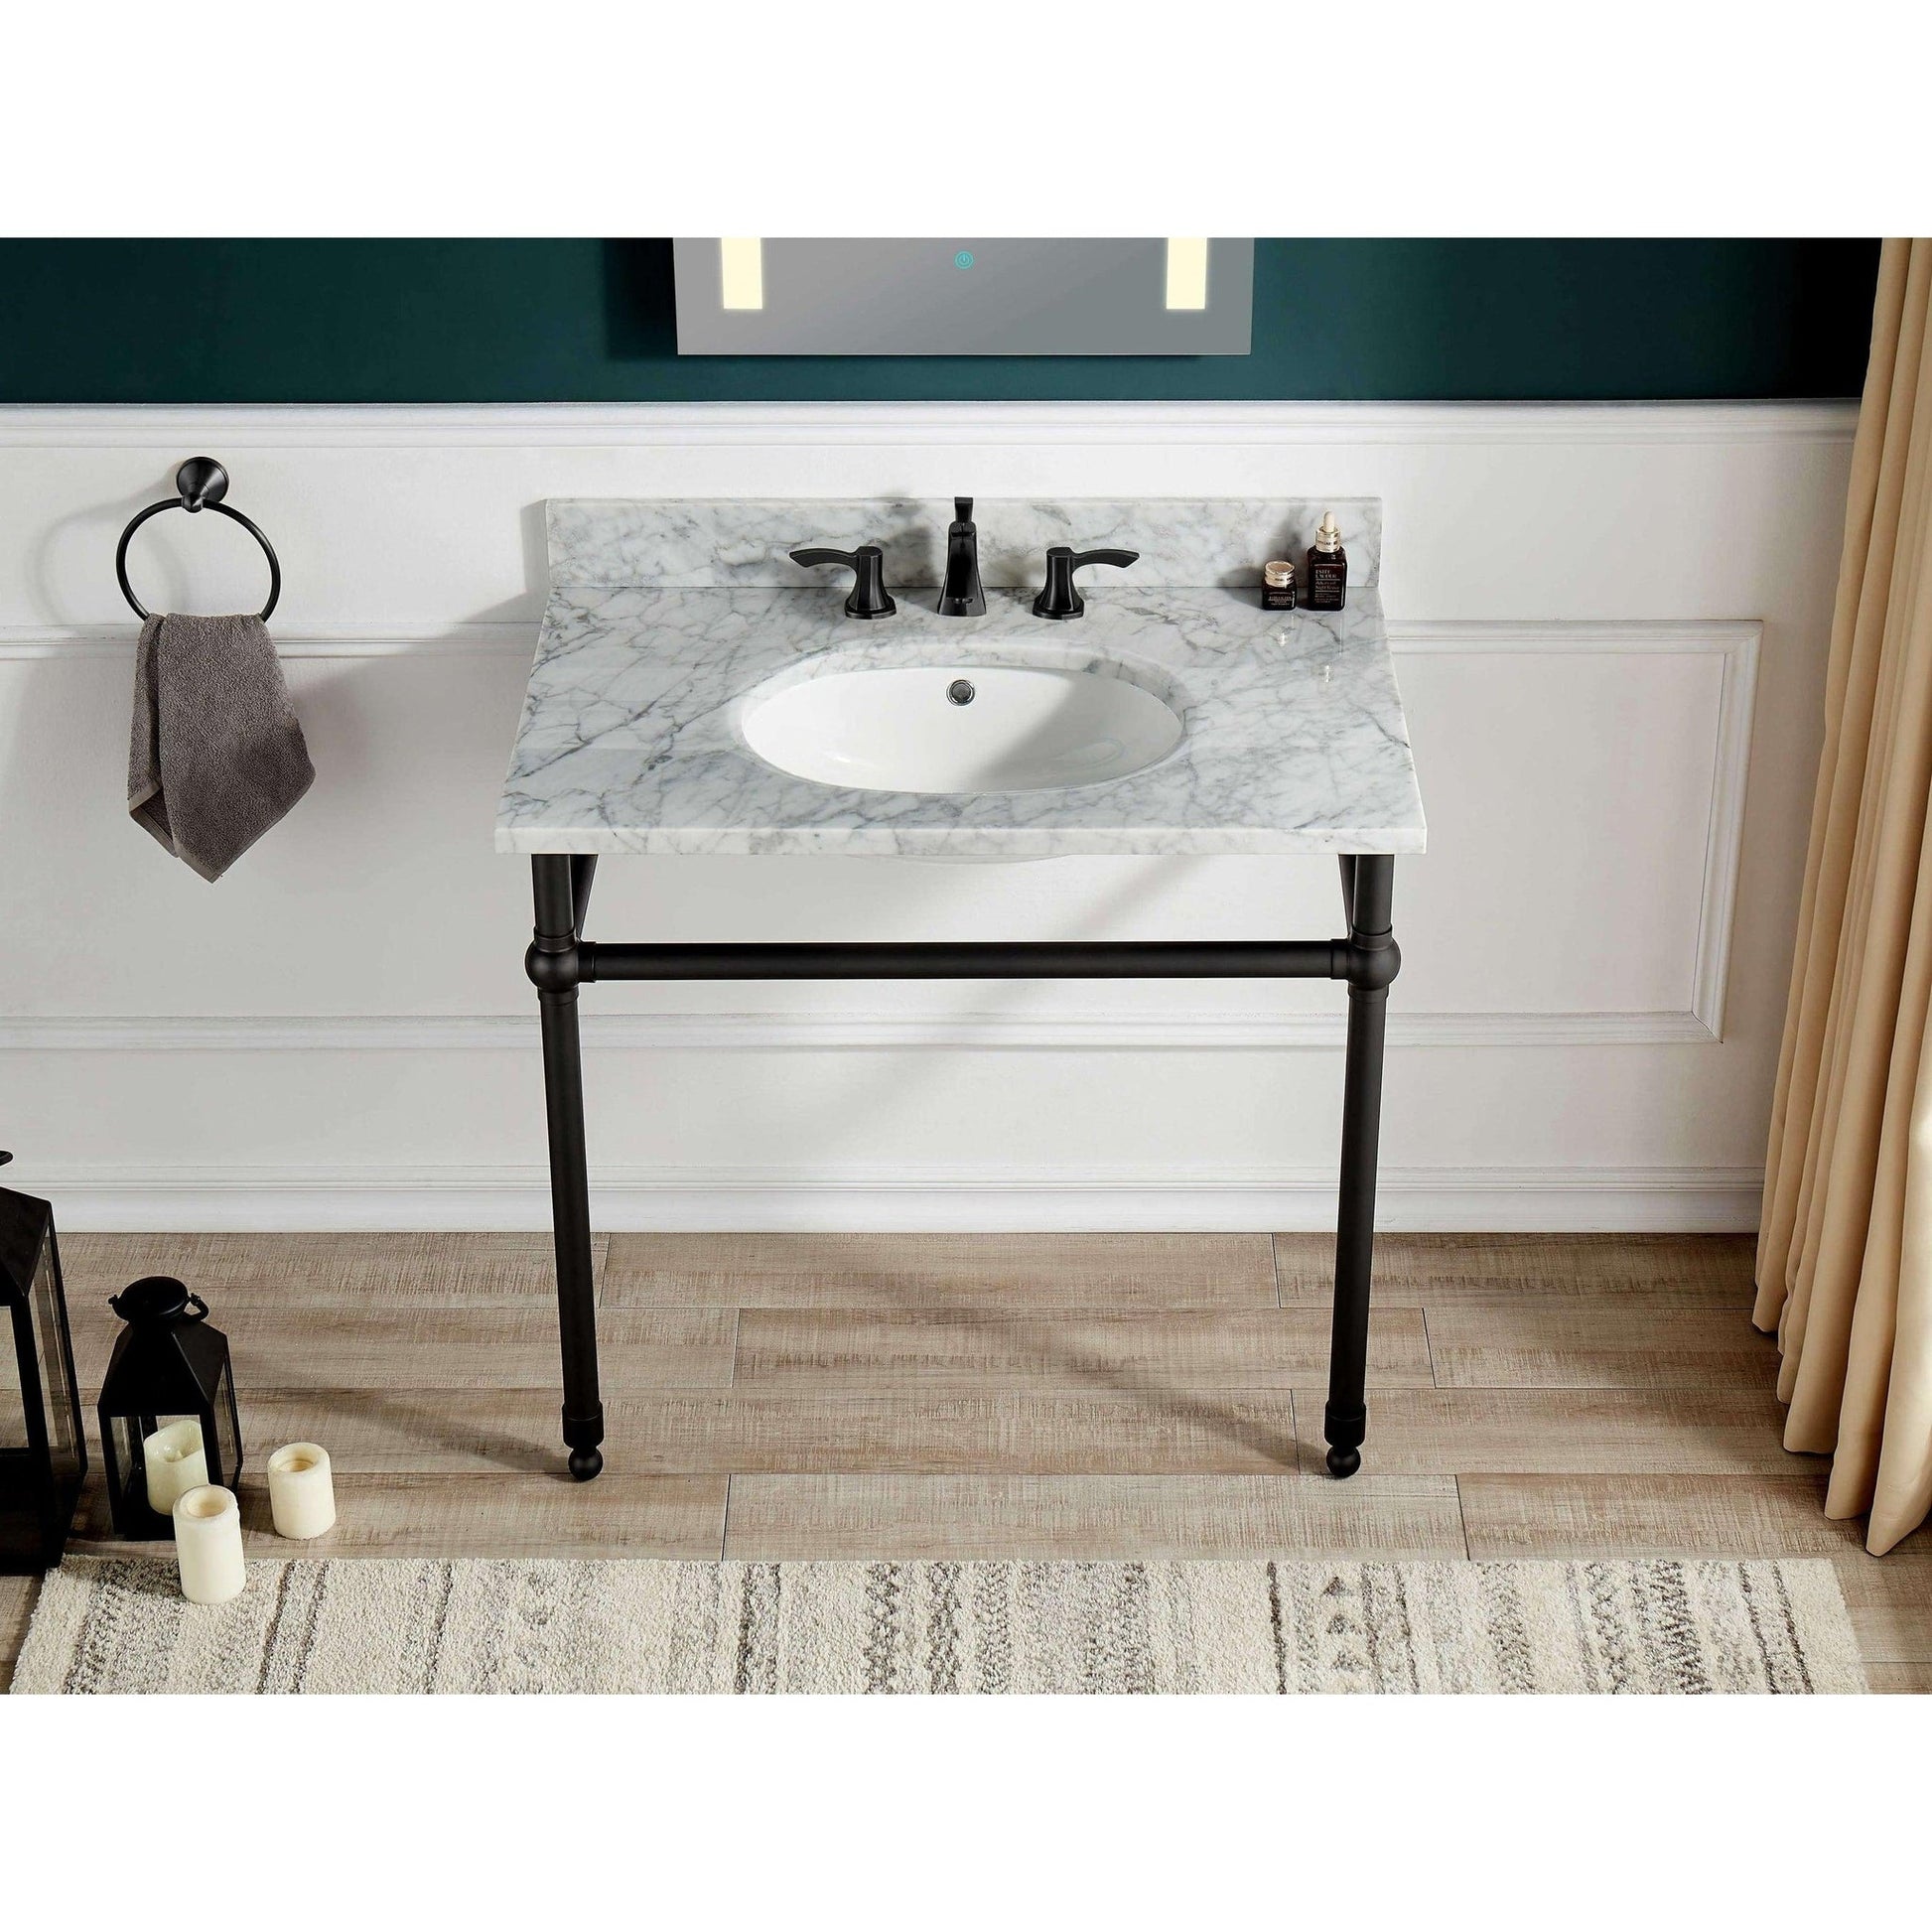 ANZZI Verona Series 34.5" x 34" Console Sink in White Carrara Countertop With Matte Black Stainless Steel Stand Legs